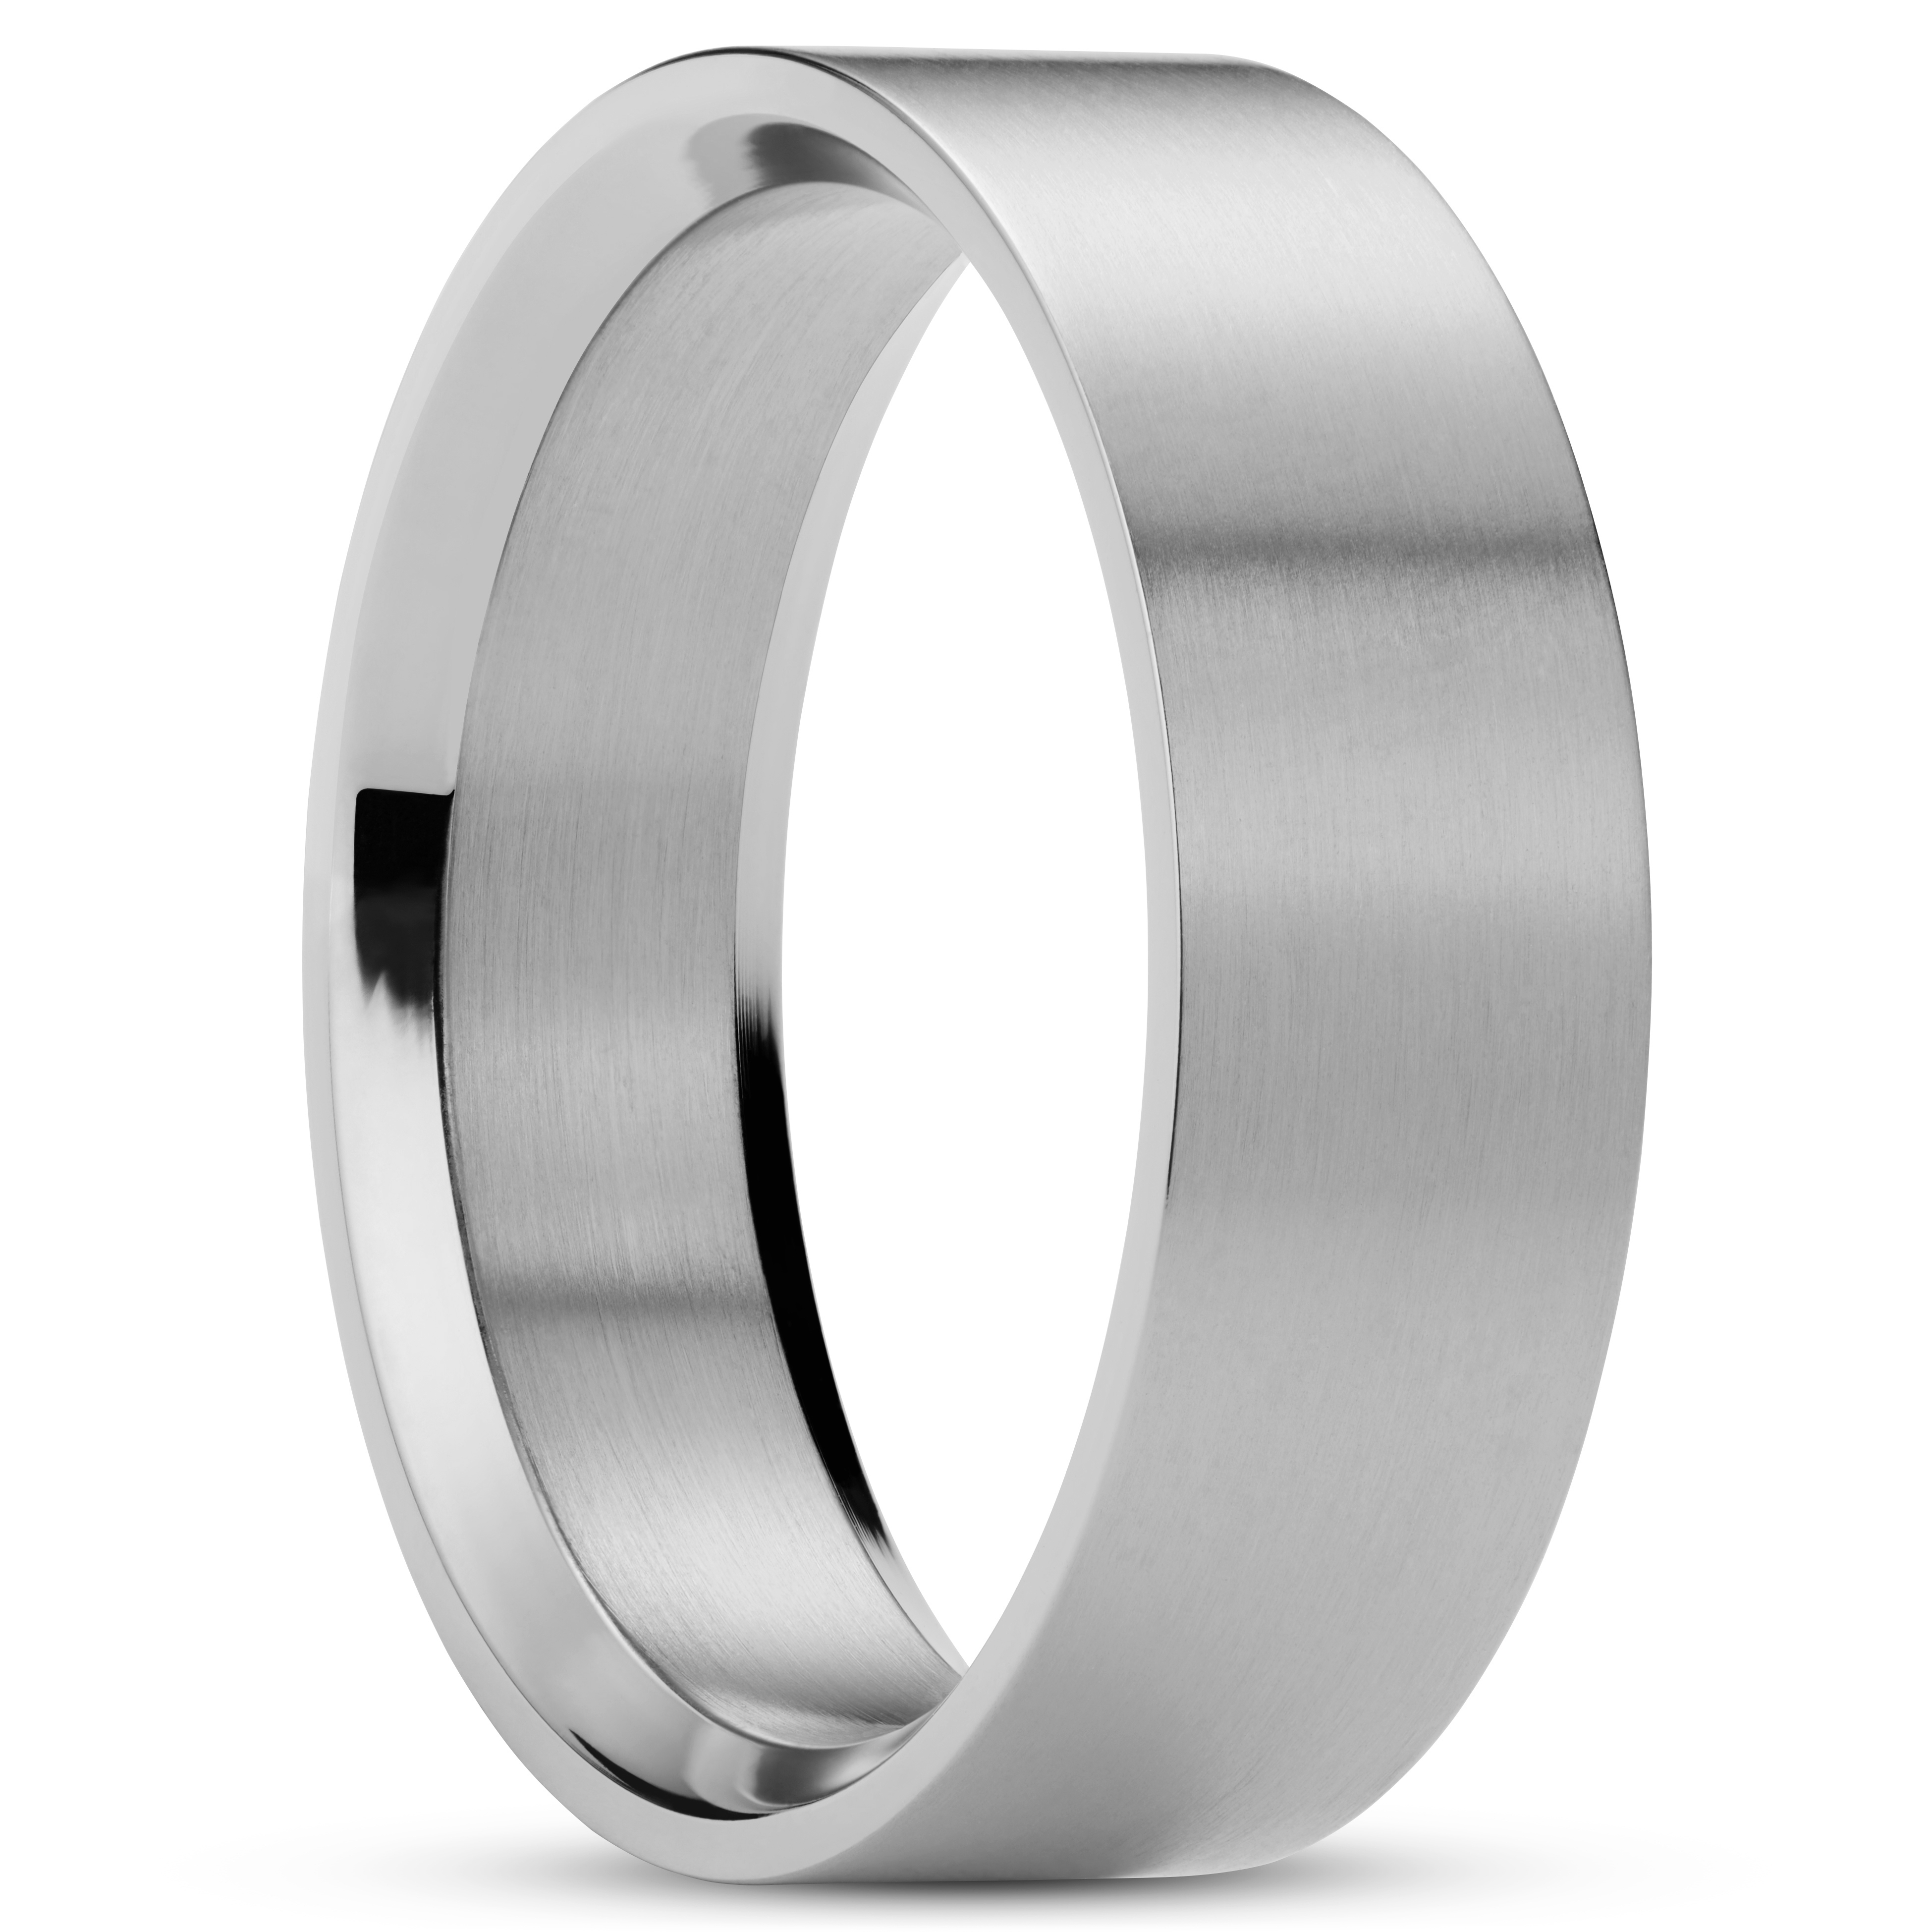 Mens Wedding Bands Stainless Steel Beveled Edge 8mm CZ Anniversary Promise  Rings for Him (Size 9) | Amazon.com